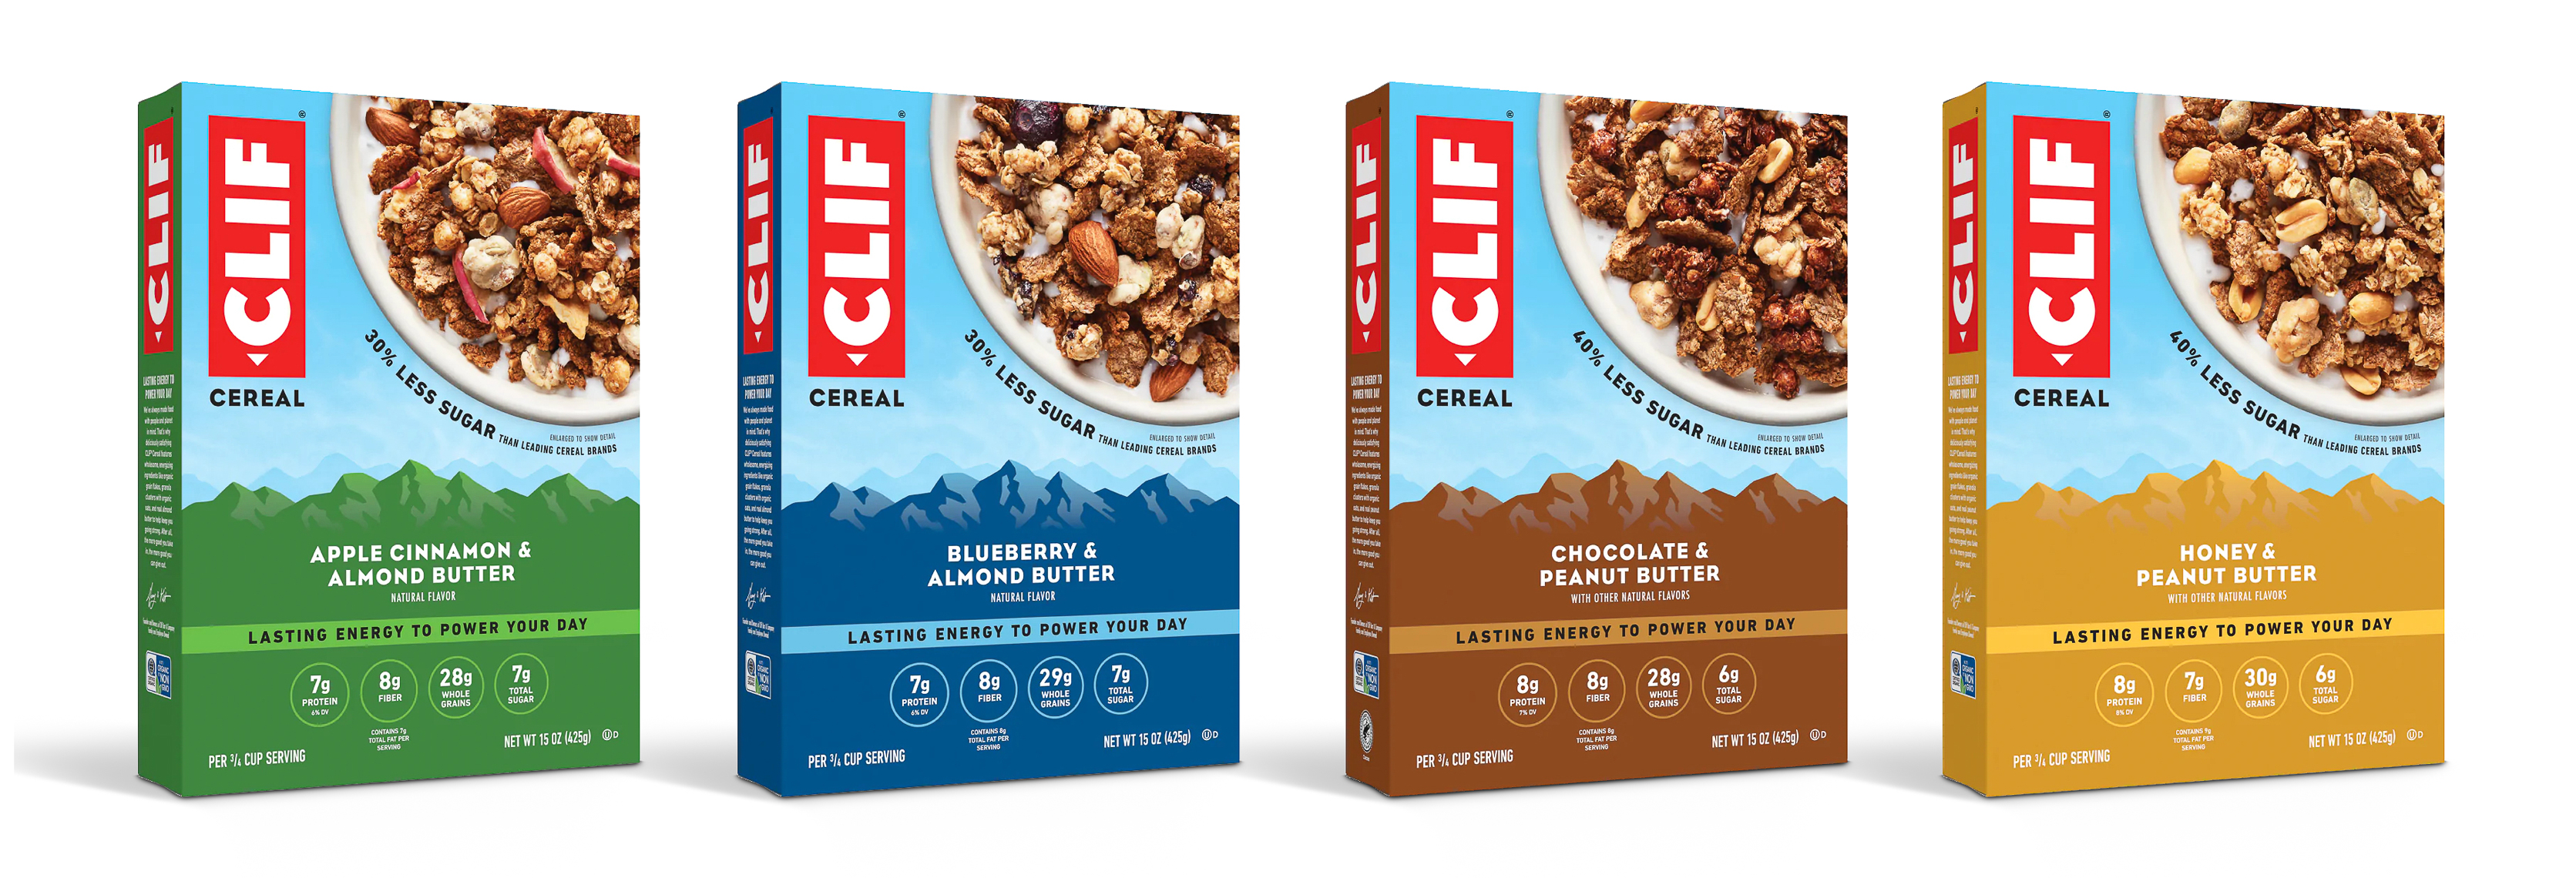 Clif Cereal Packaging